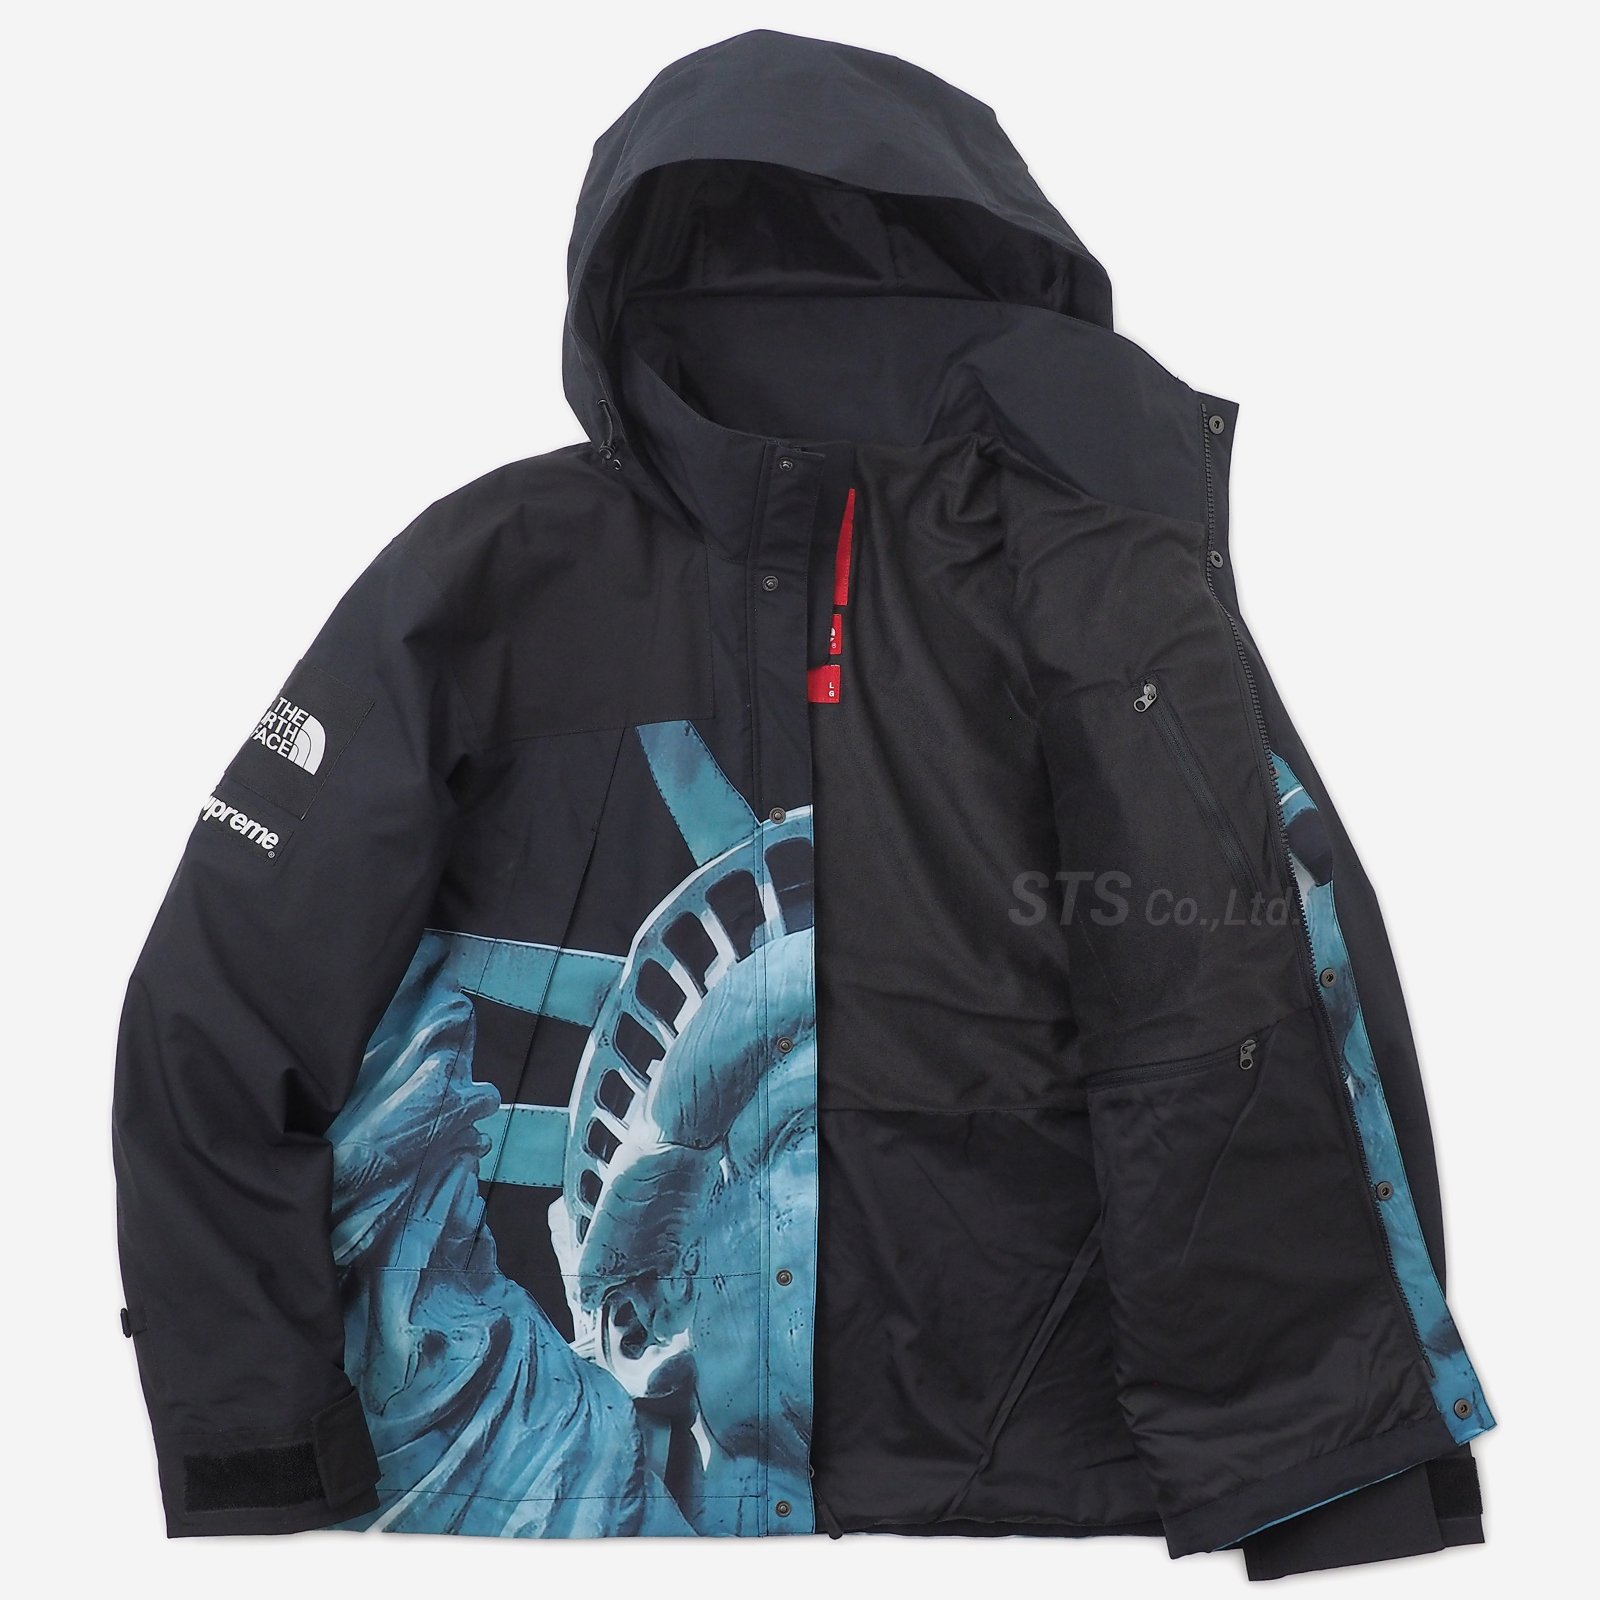 Supreme/The North Face Statue of Liberty Mountain Jacket - UG 